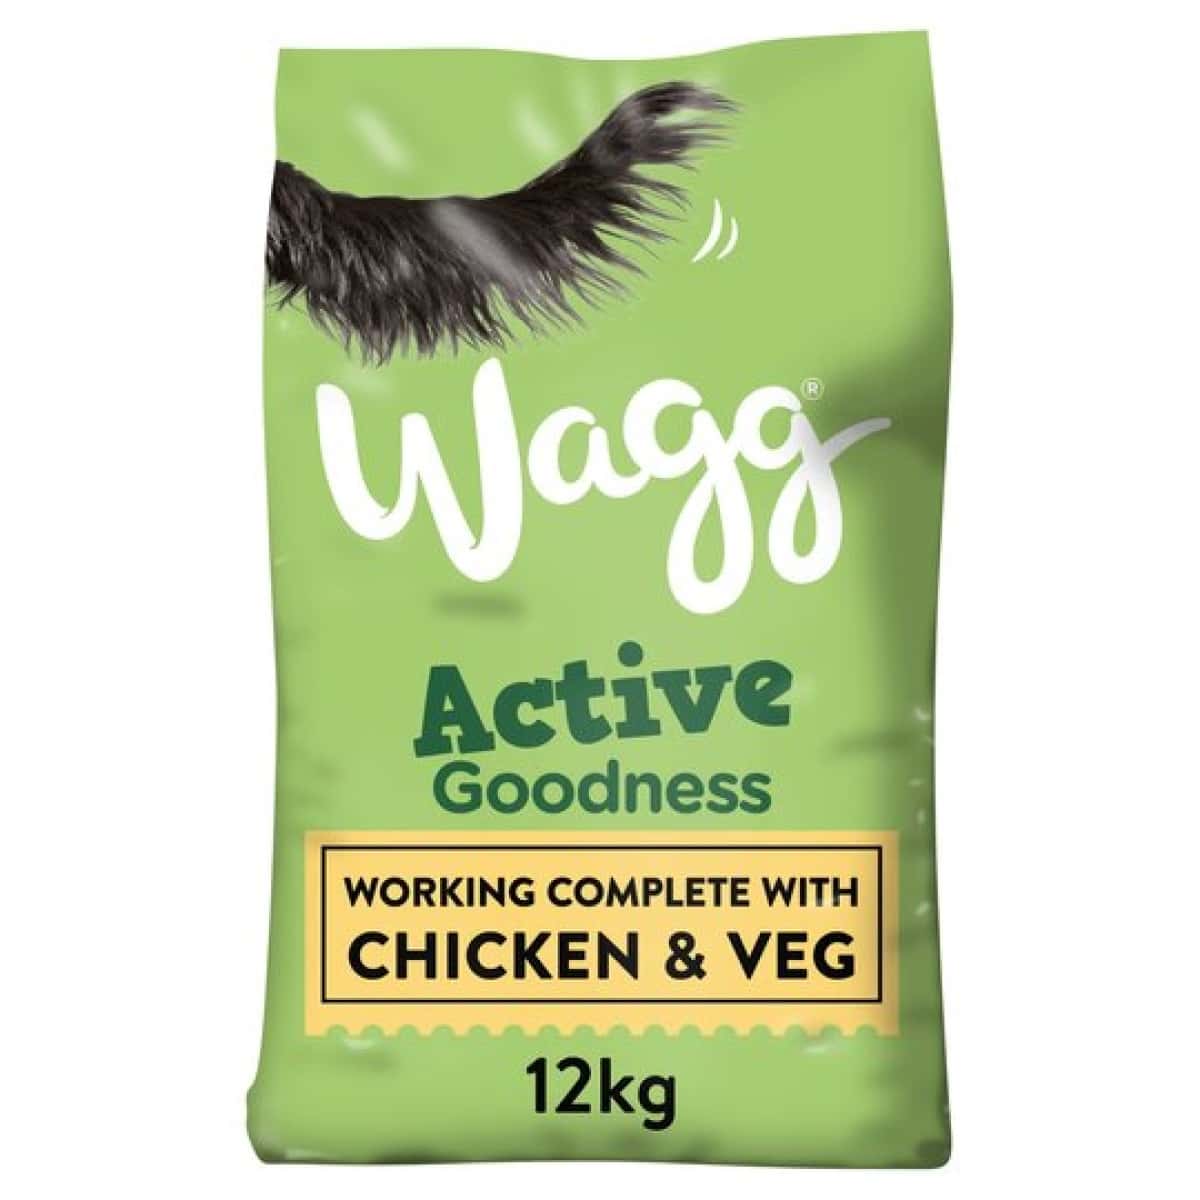 Wagg Active 2kg - Chicken Main Image